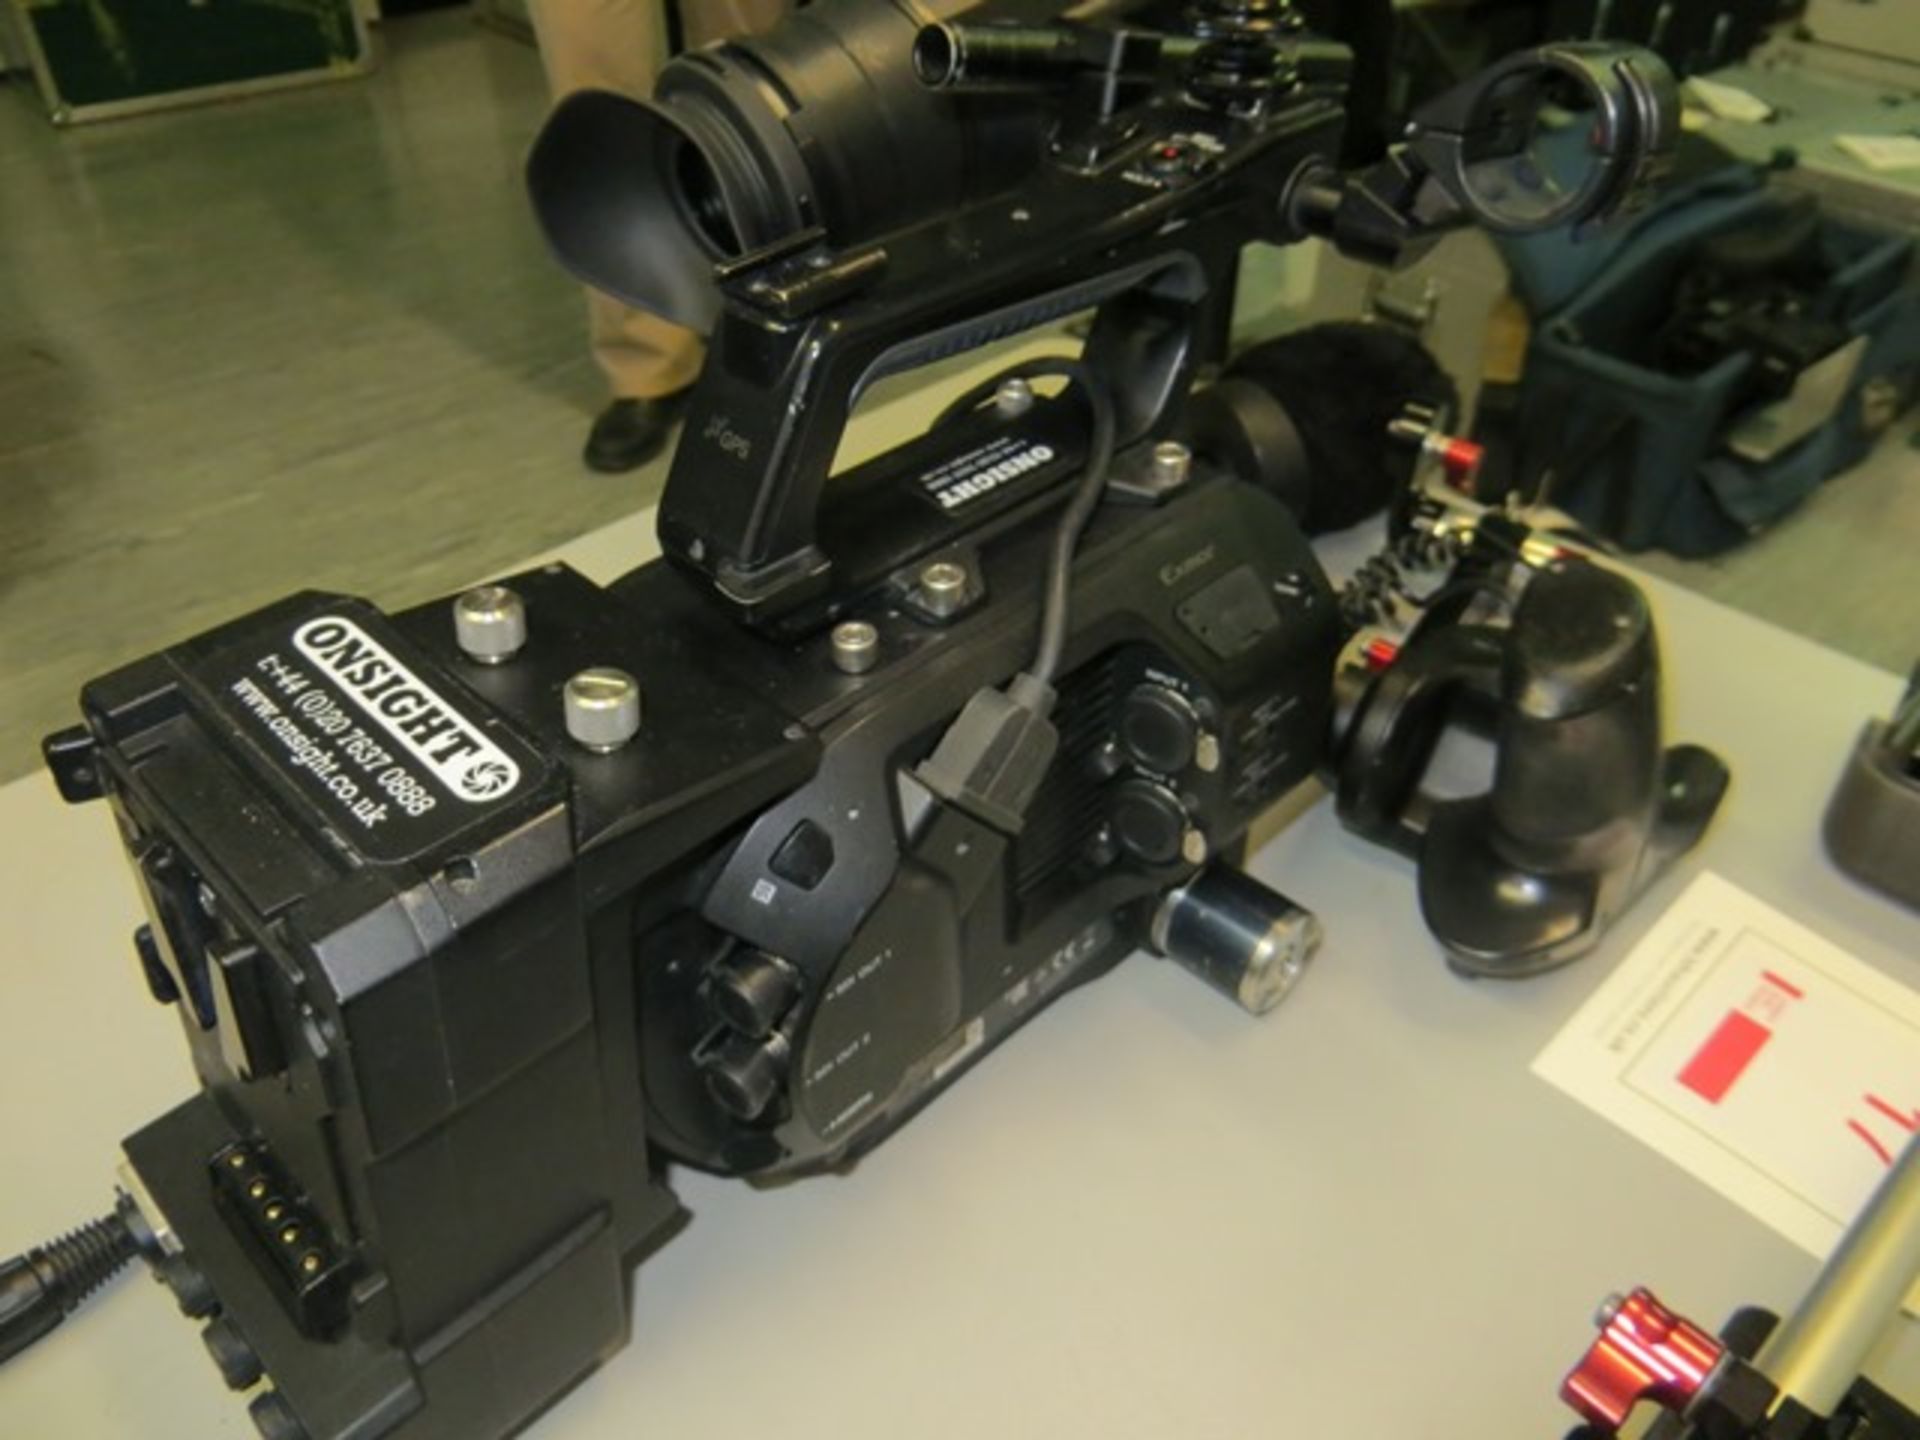 Sony PXW-FS7 4K Camcorder Super XD Camera s/n 34576 c/w plate mounts, Canon Metabones EF to E - Image 4 of 5